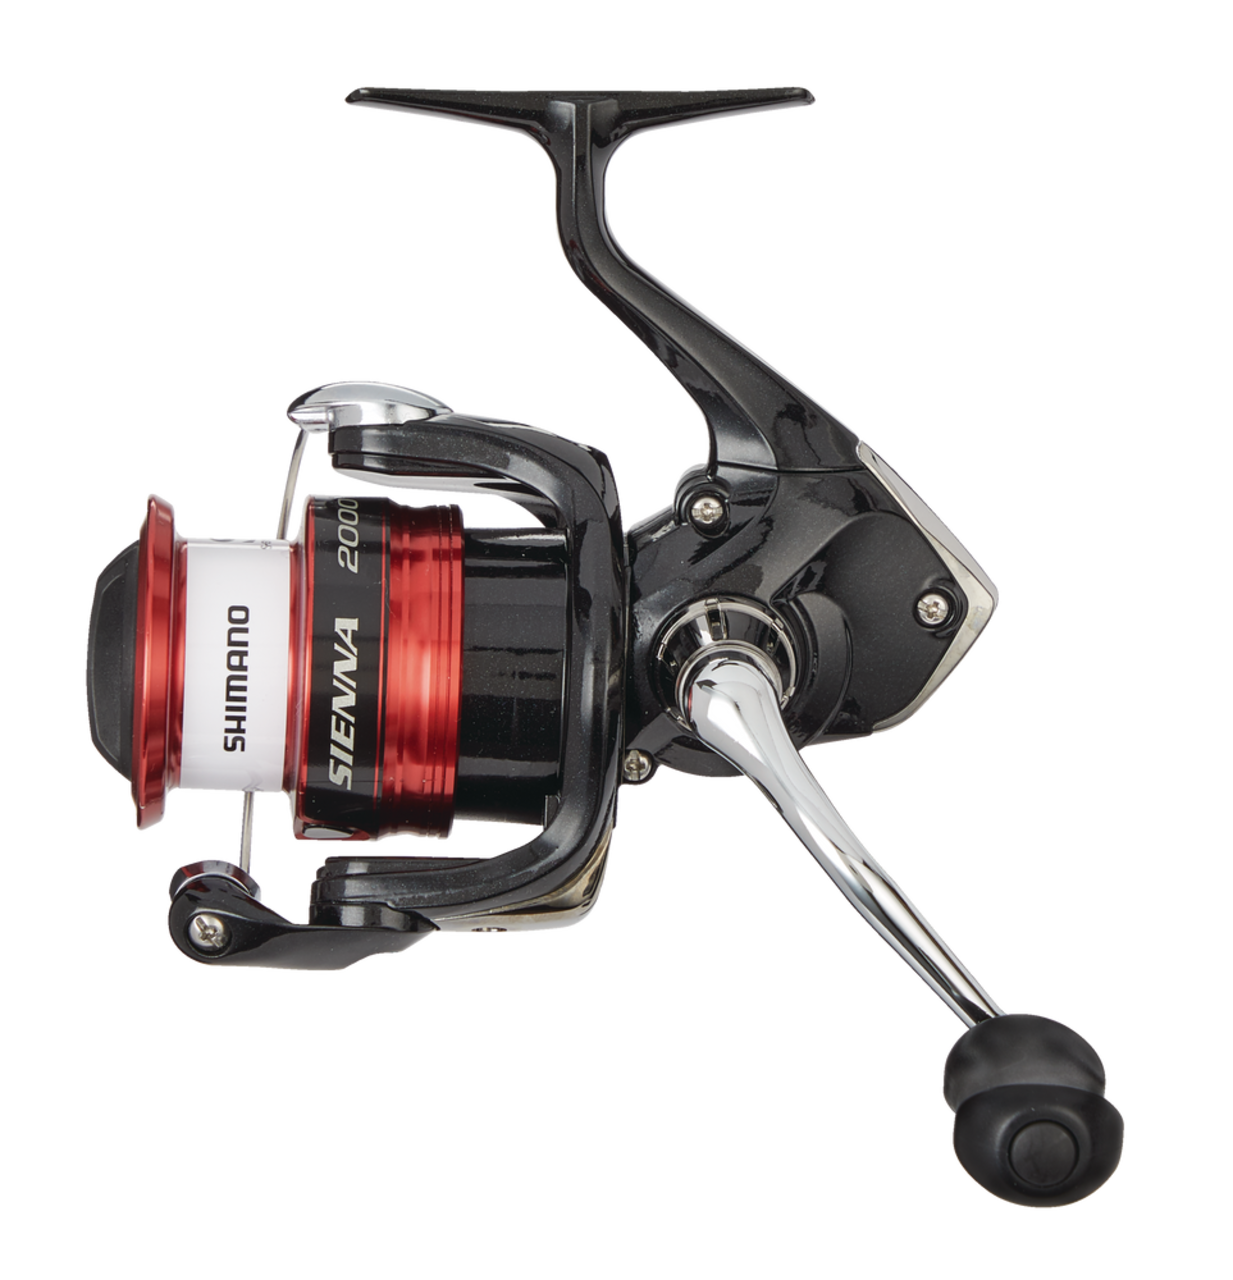 GEAR REVIEW - SHIMANO SIENNA REEL TOD COMBO 